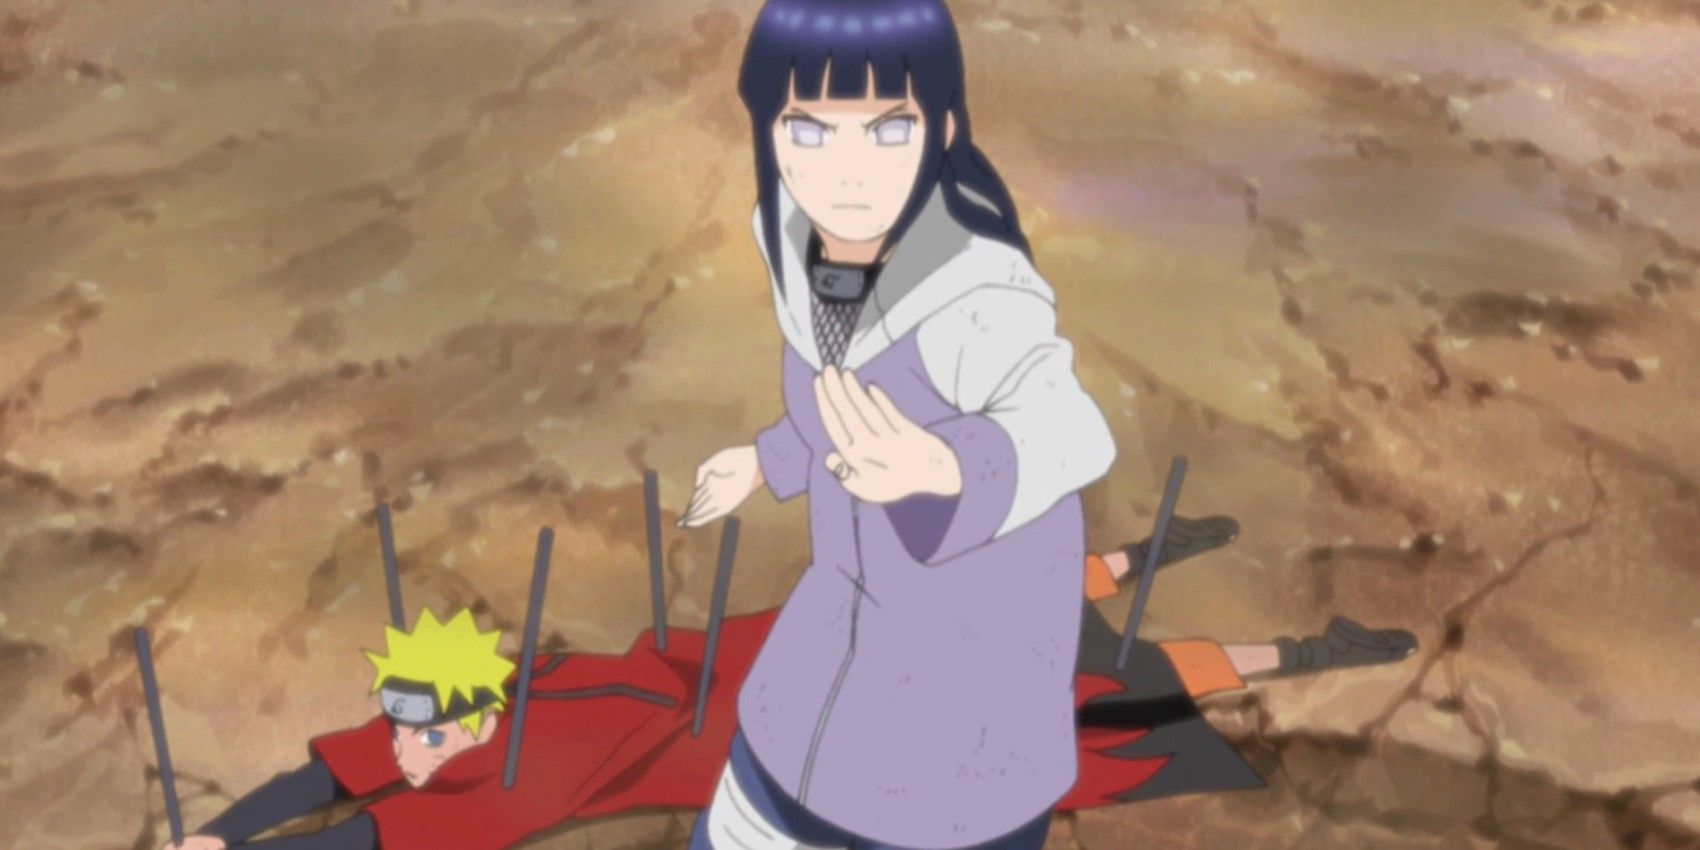 Hinata protects Naruto after he's pinned by Pain in Naruto: Shippuden